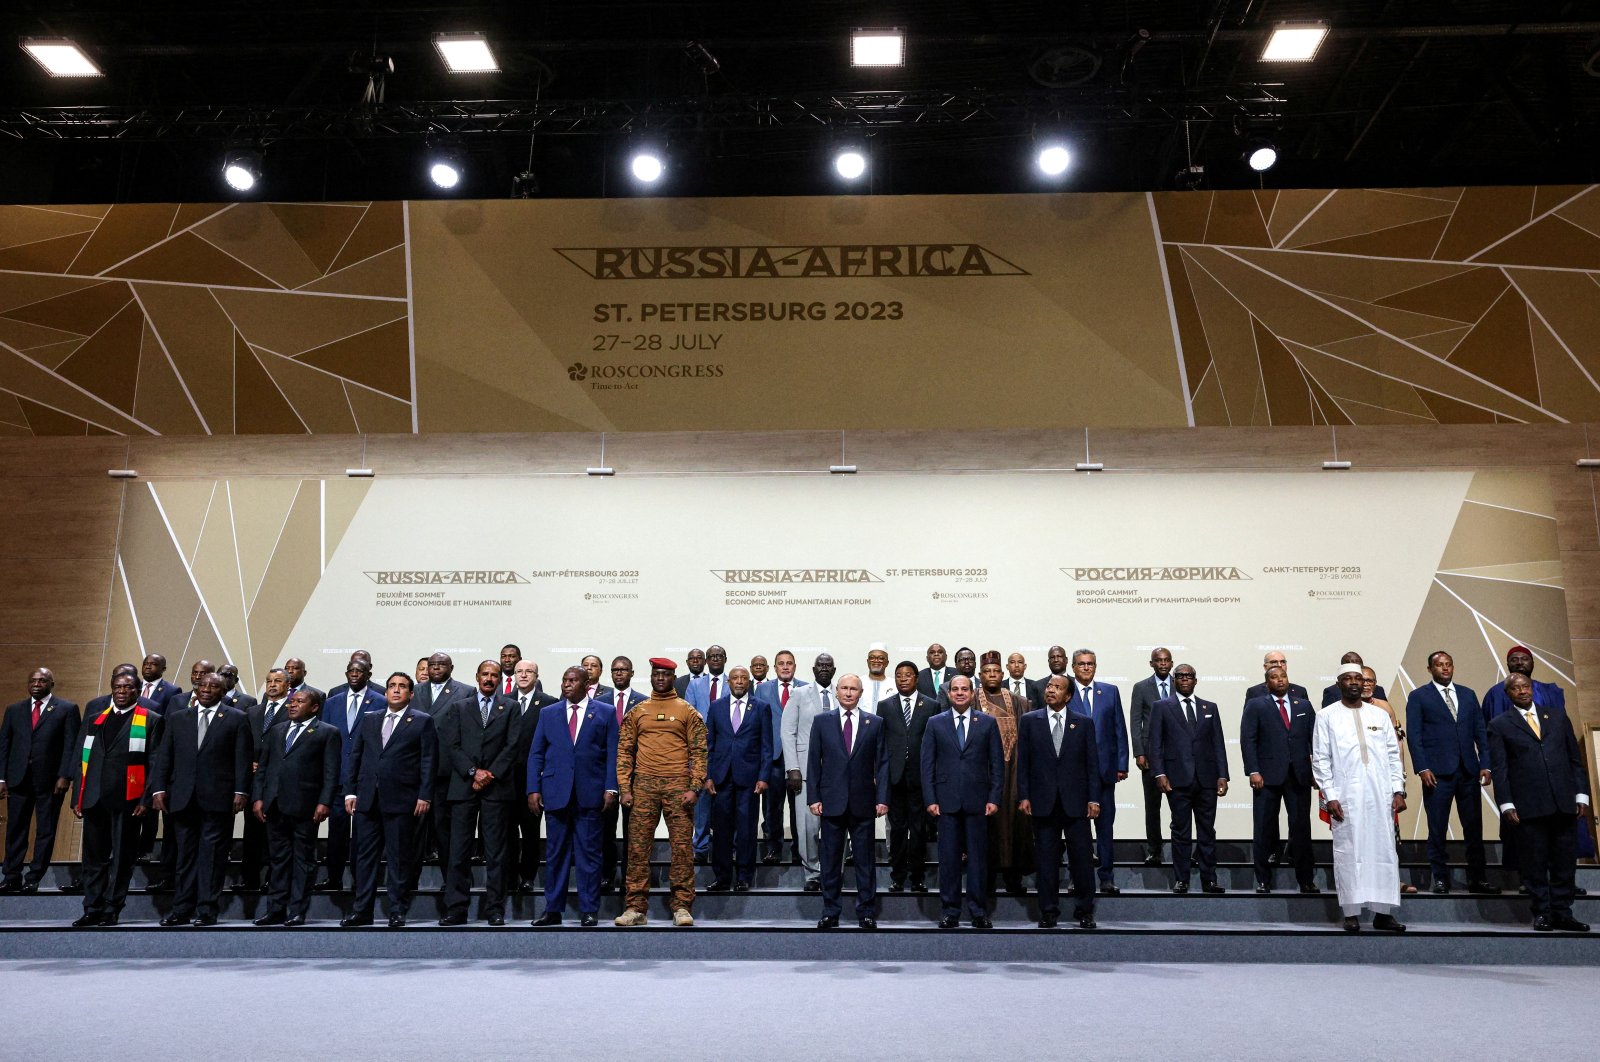 Russian President Vladimir Putin and participants of the Russia-Africa summit pose for a photo in St. Petersburg, Russia, July 28, 2023. (Reuters Photo)